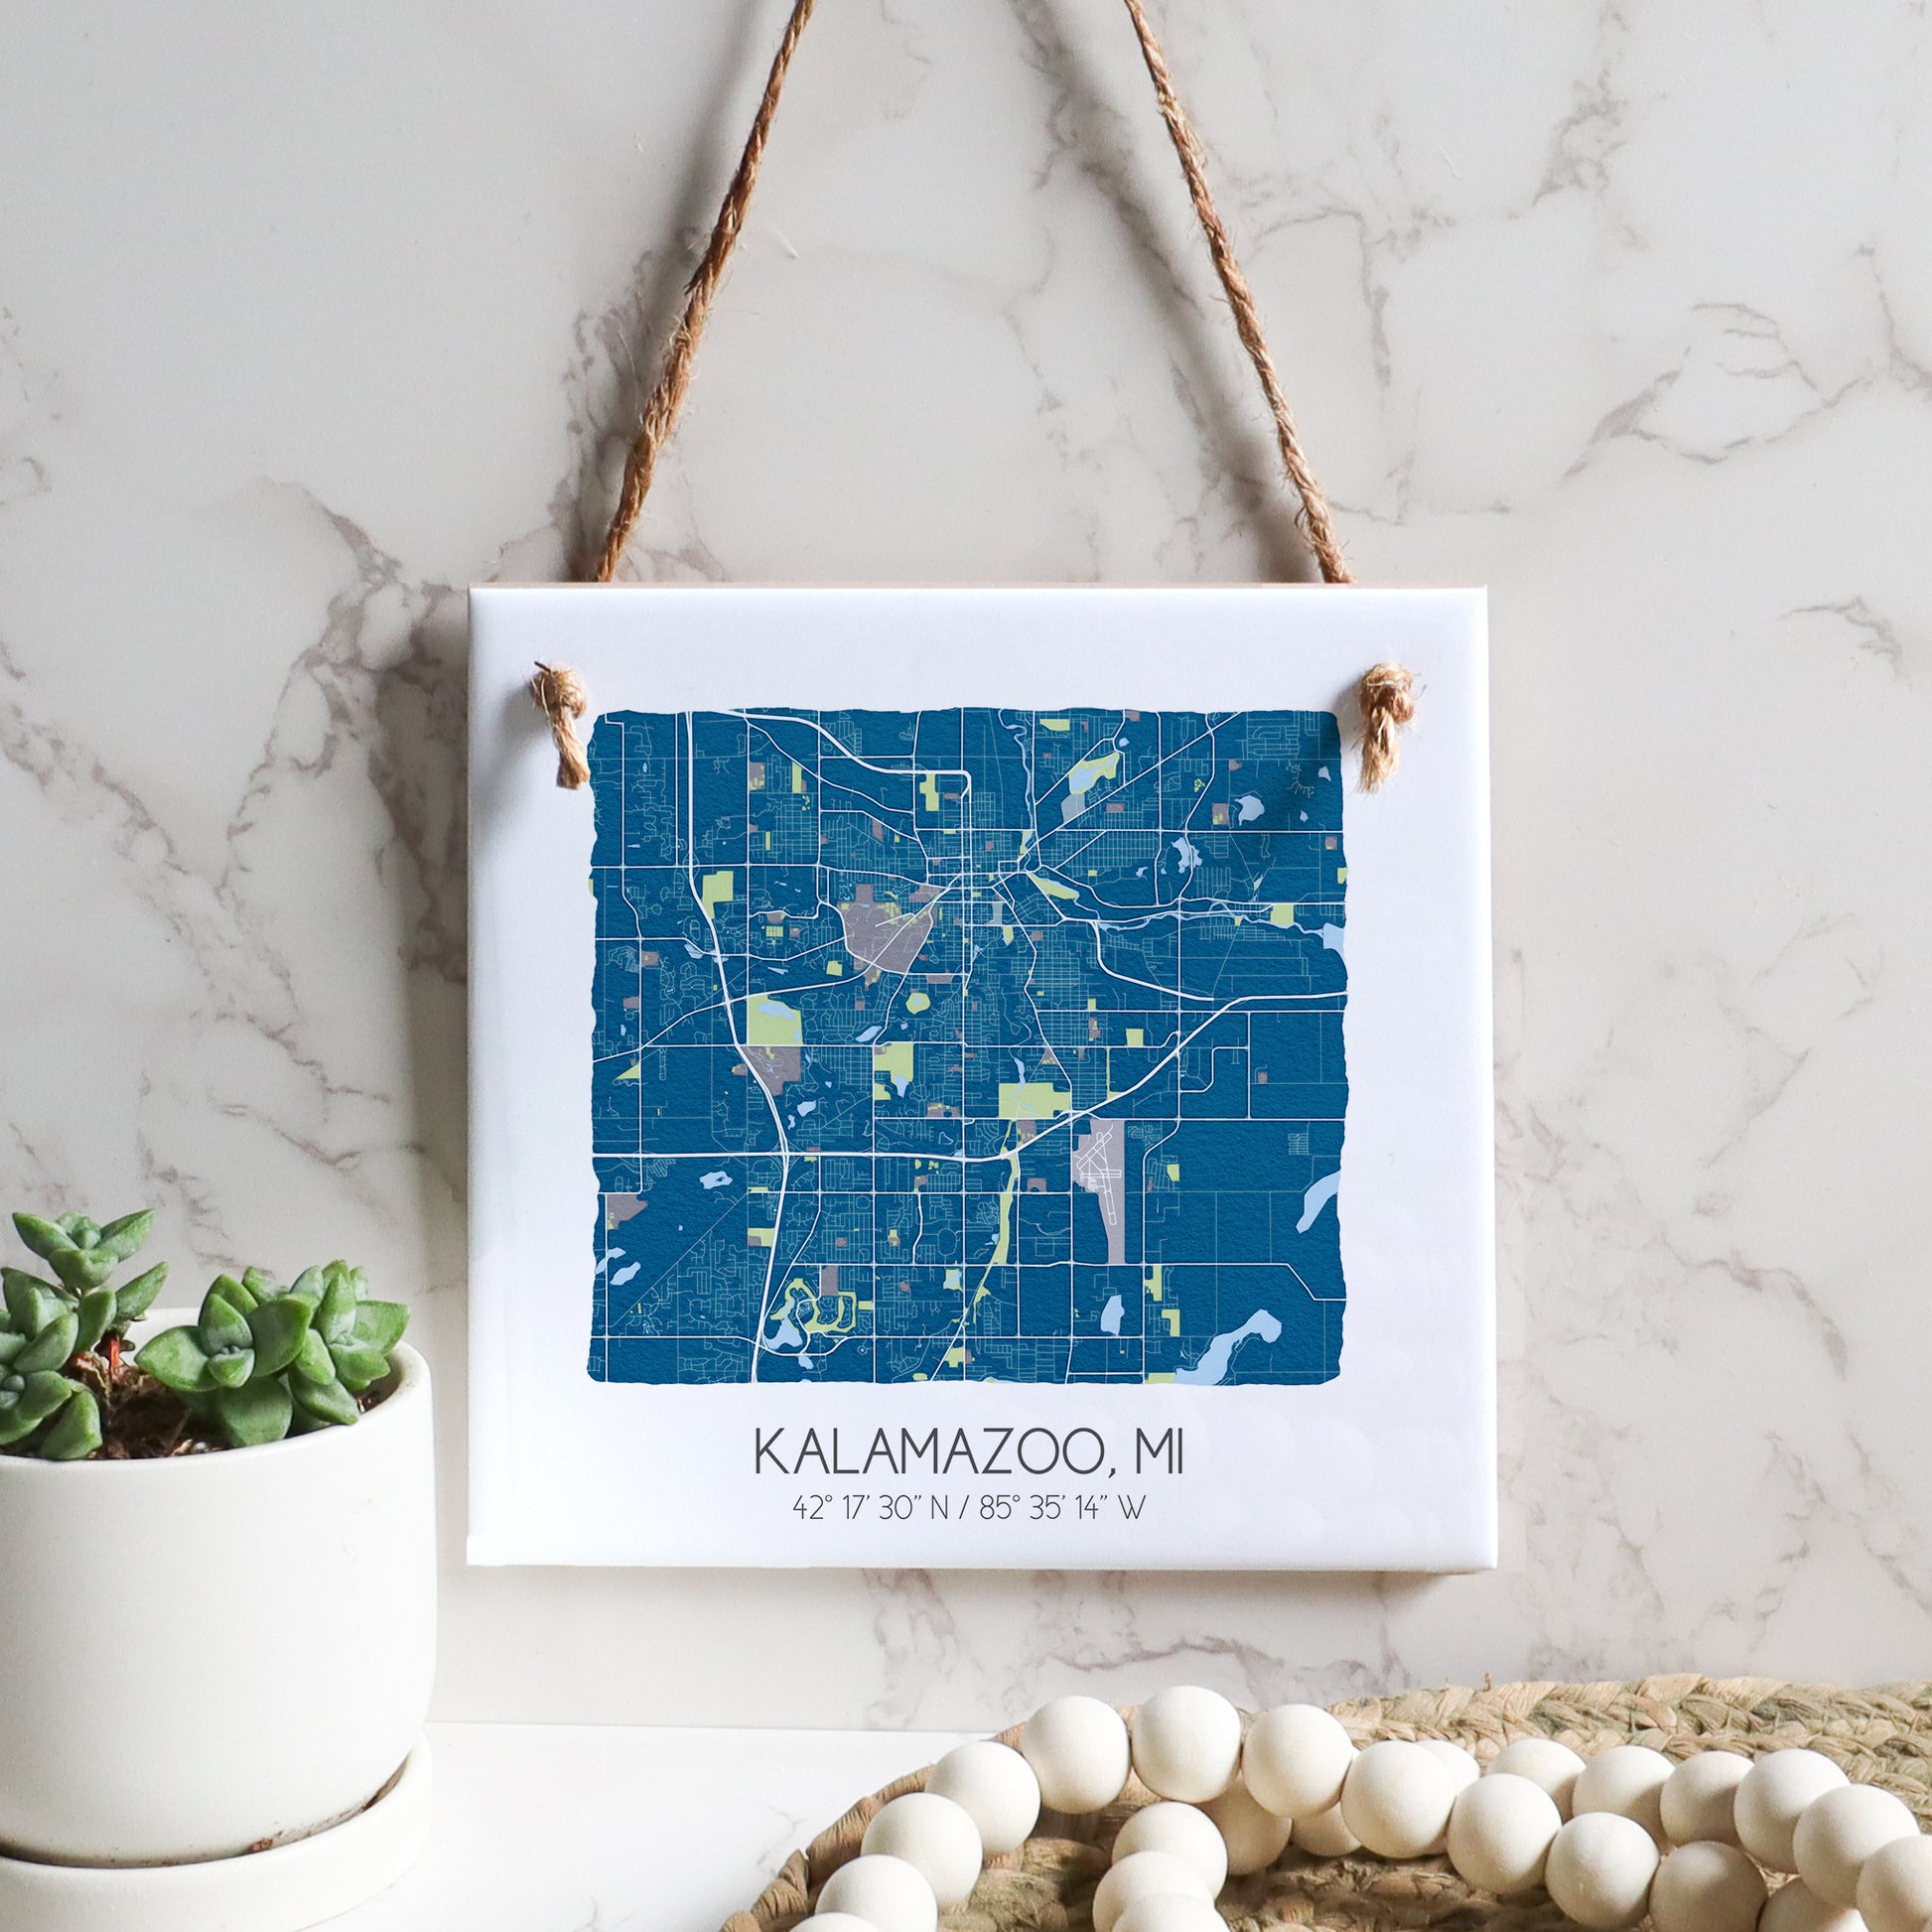 A city map of Kalamazoo MI on a square ceramic tile sign hanging on a wall, in the color blue